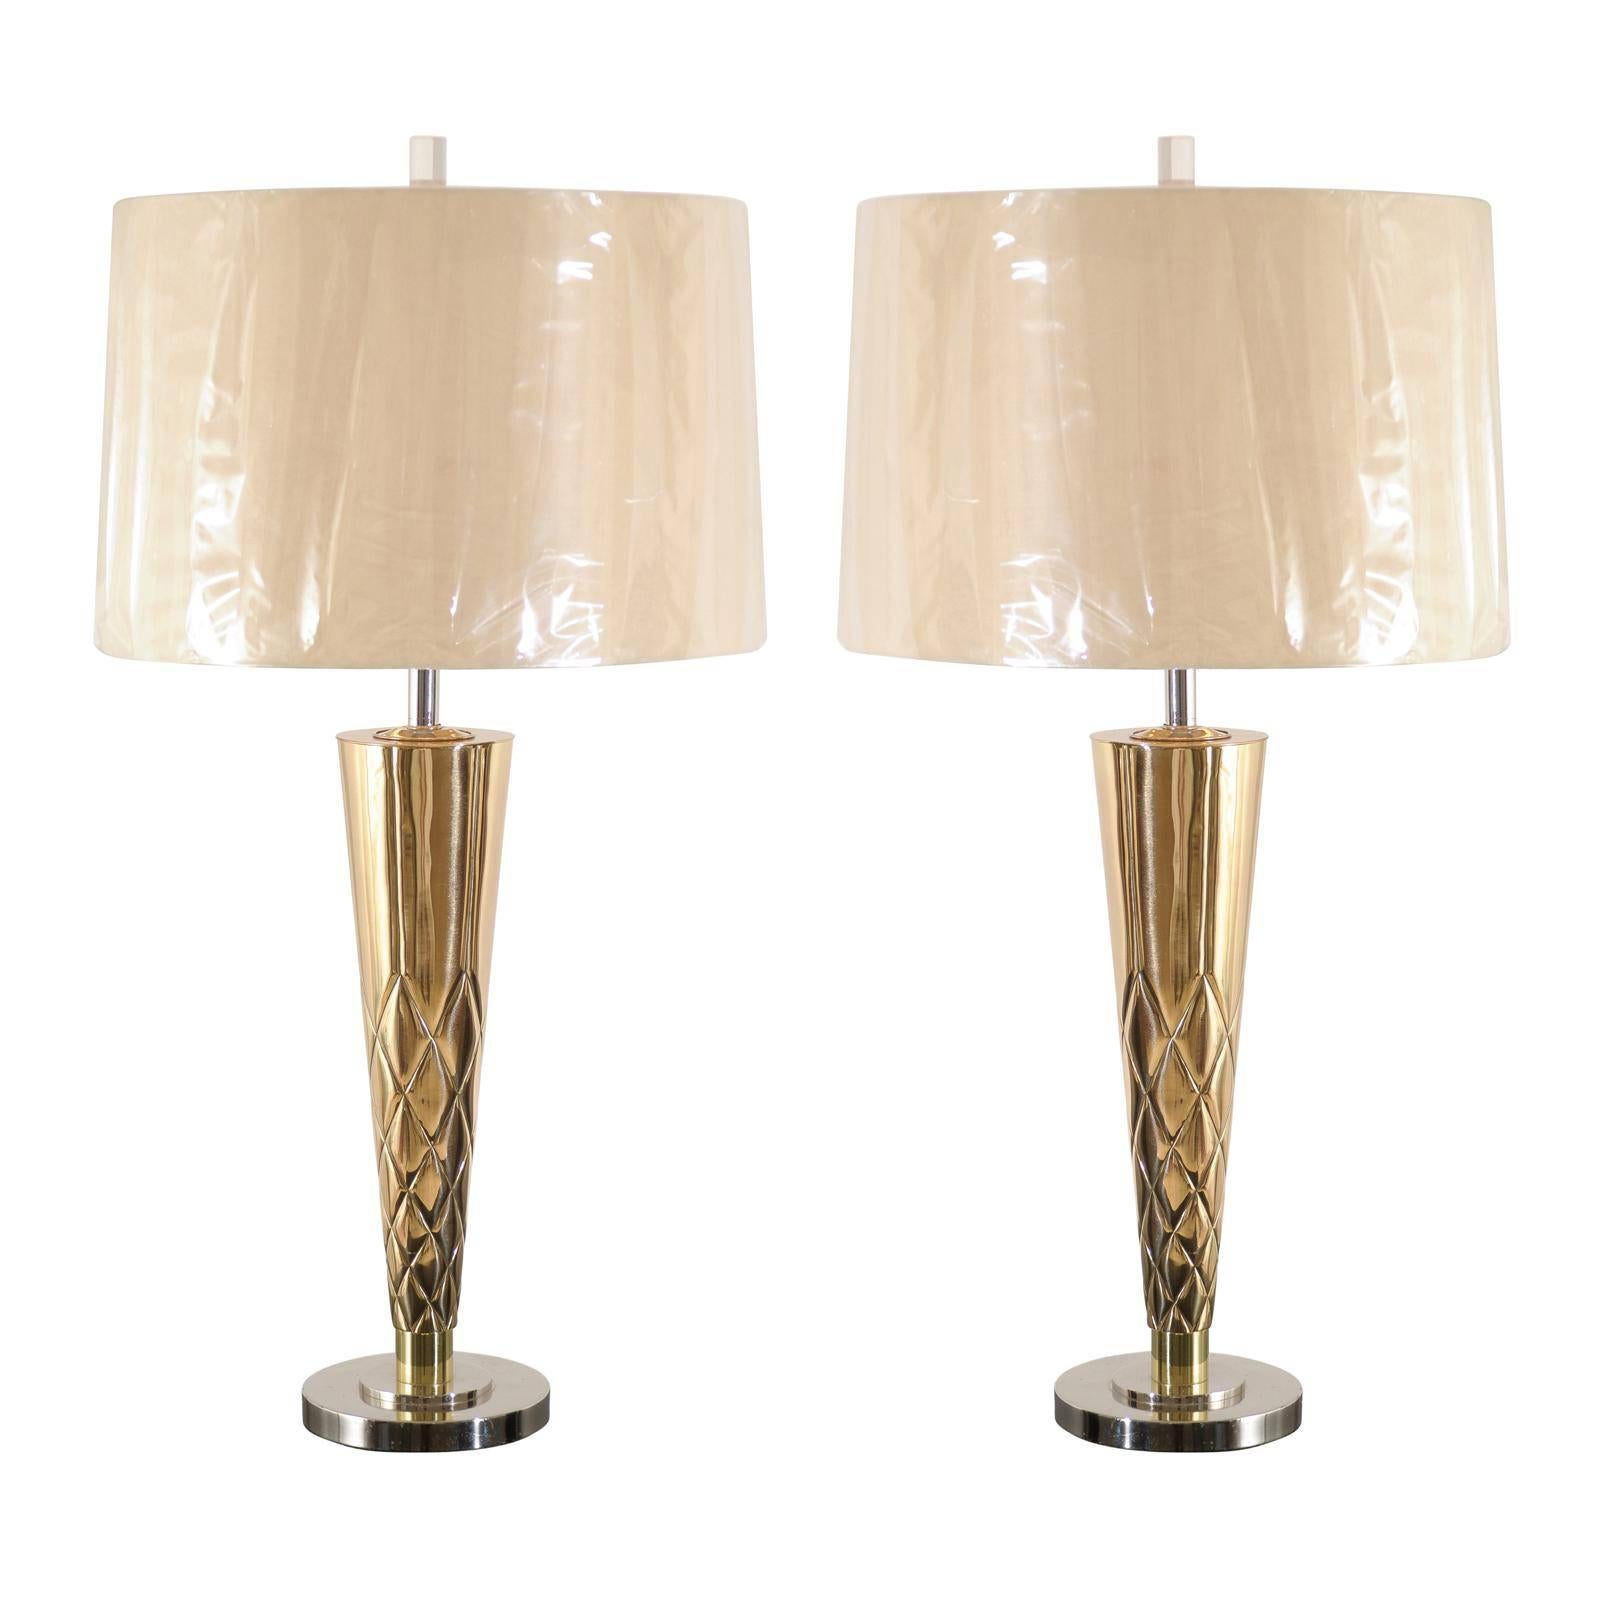 Exquisite Pair of Etched Tornado Lamps in Brass and Nickel